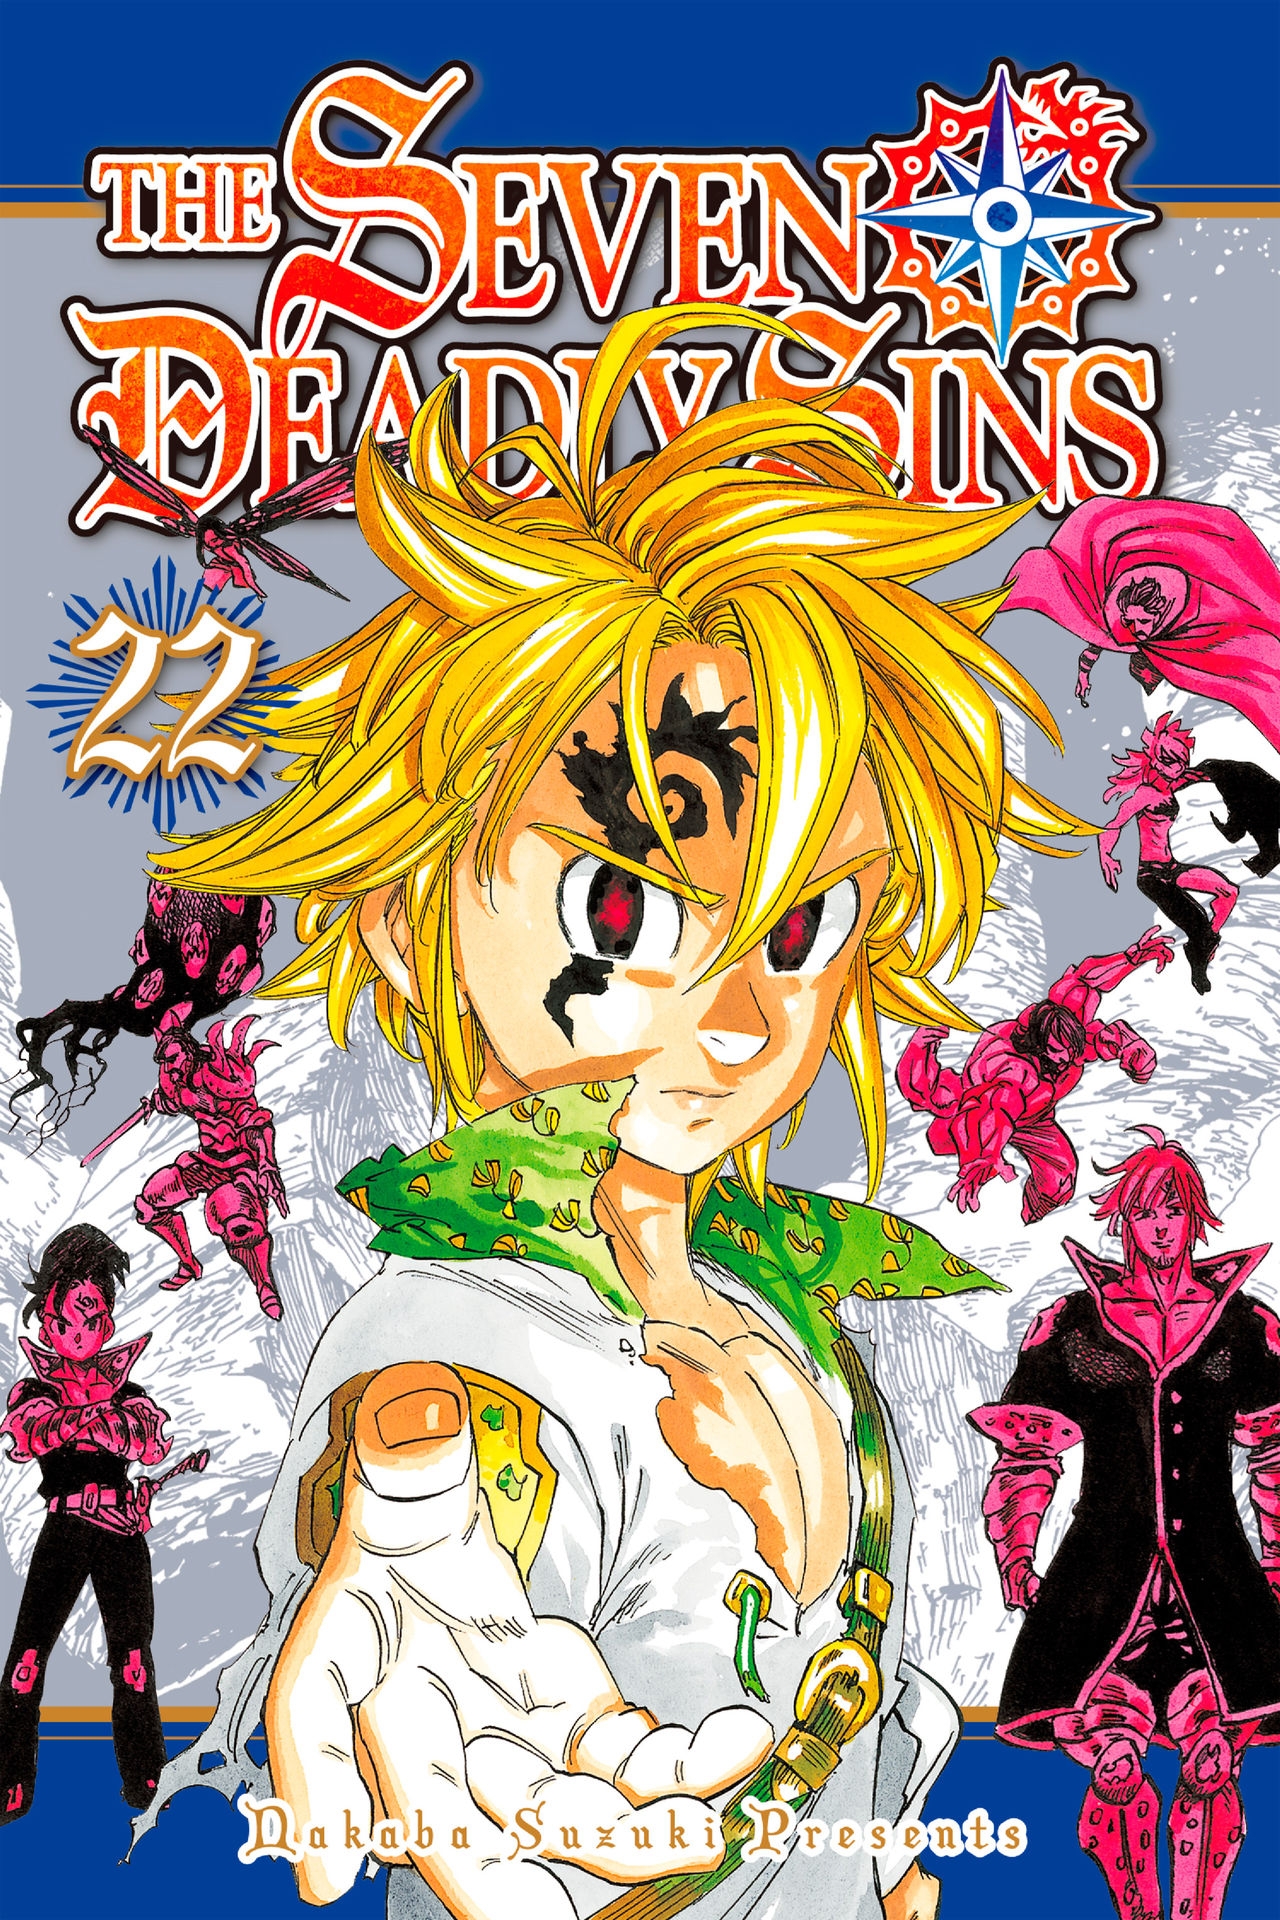 The Seven Deadly Sins (Covers & Chapter Title Cards) 377